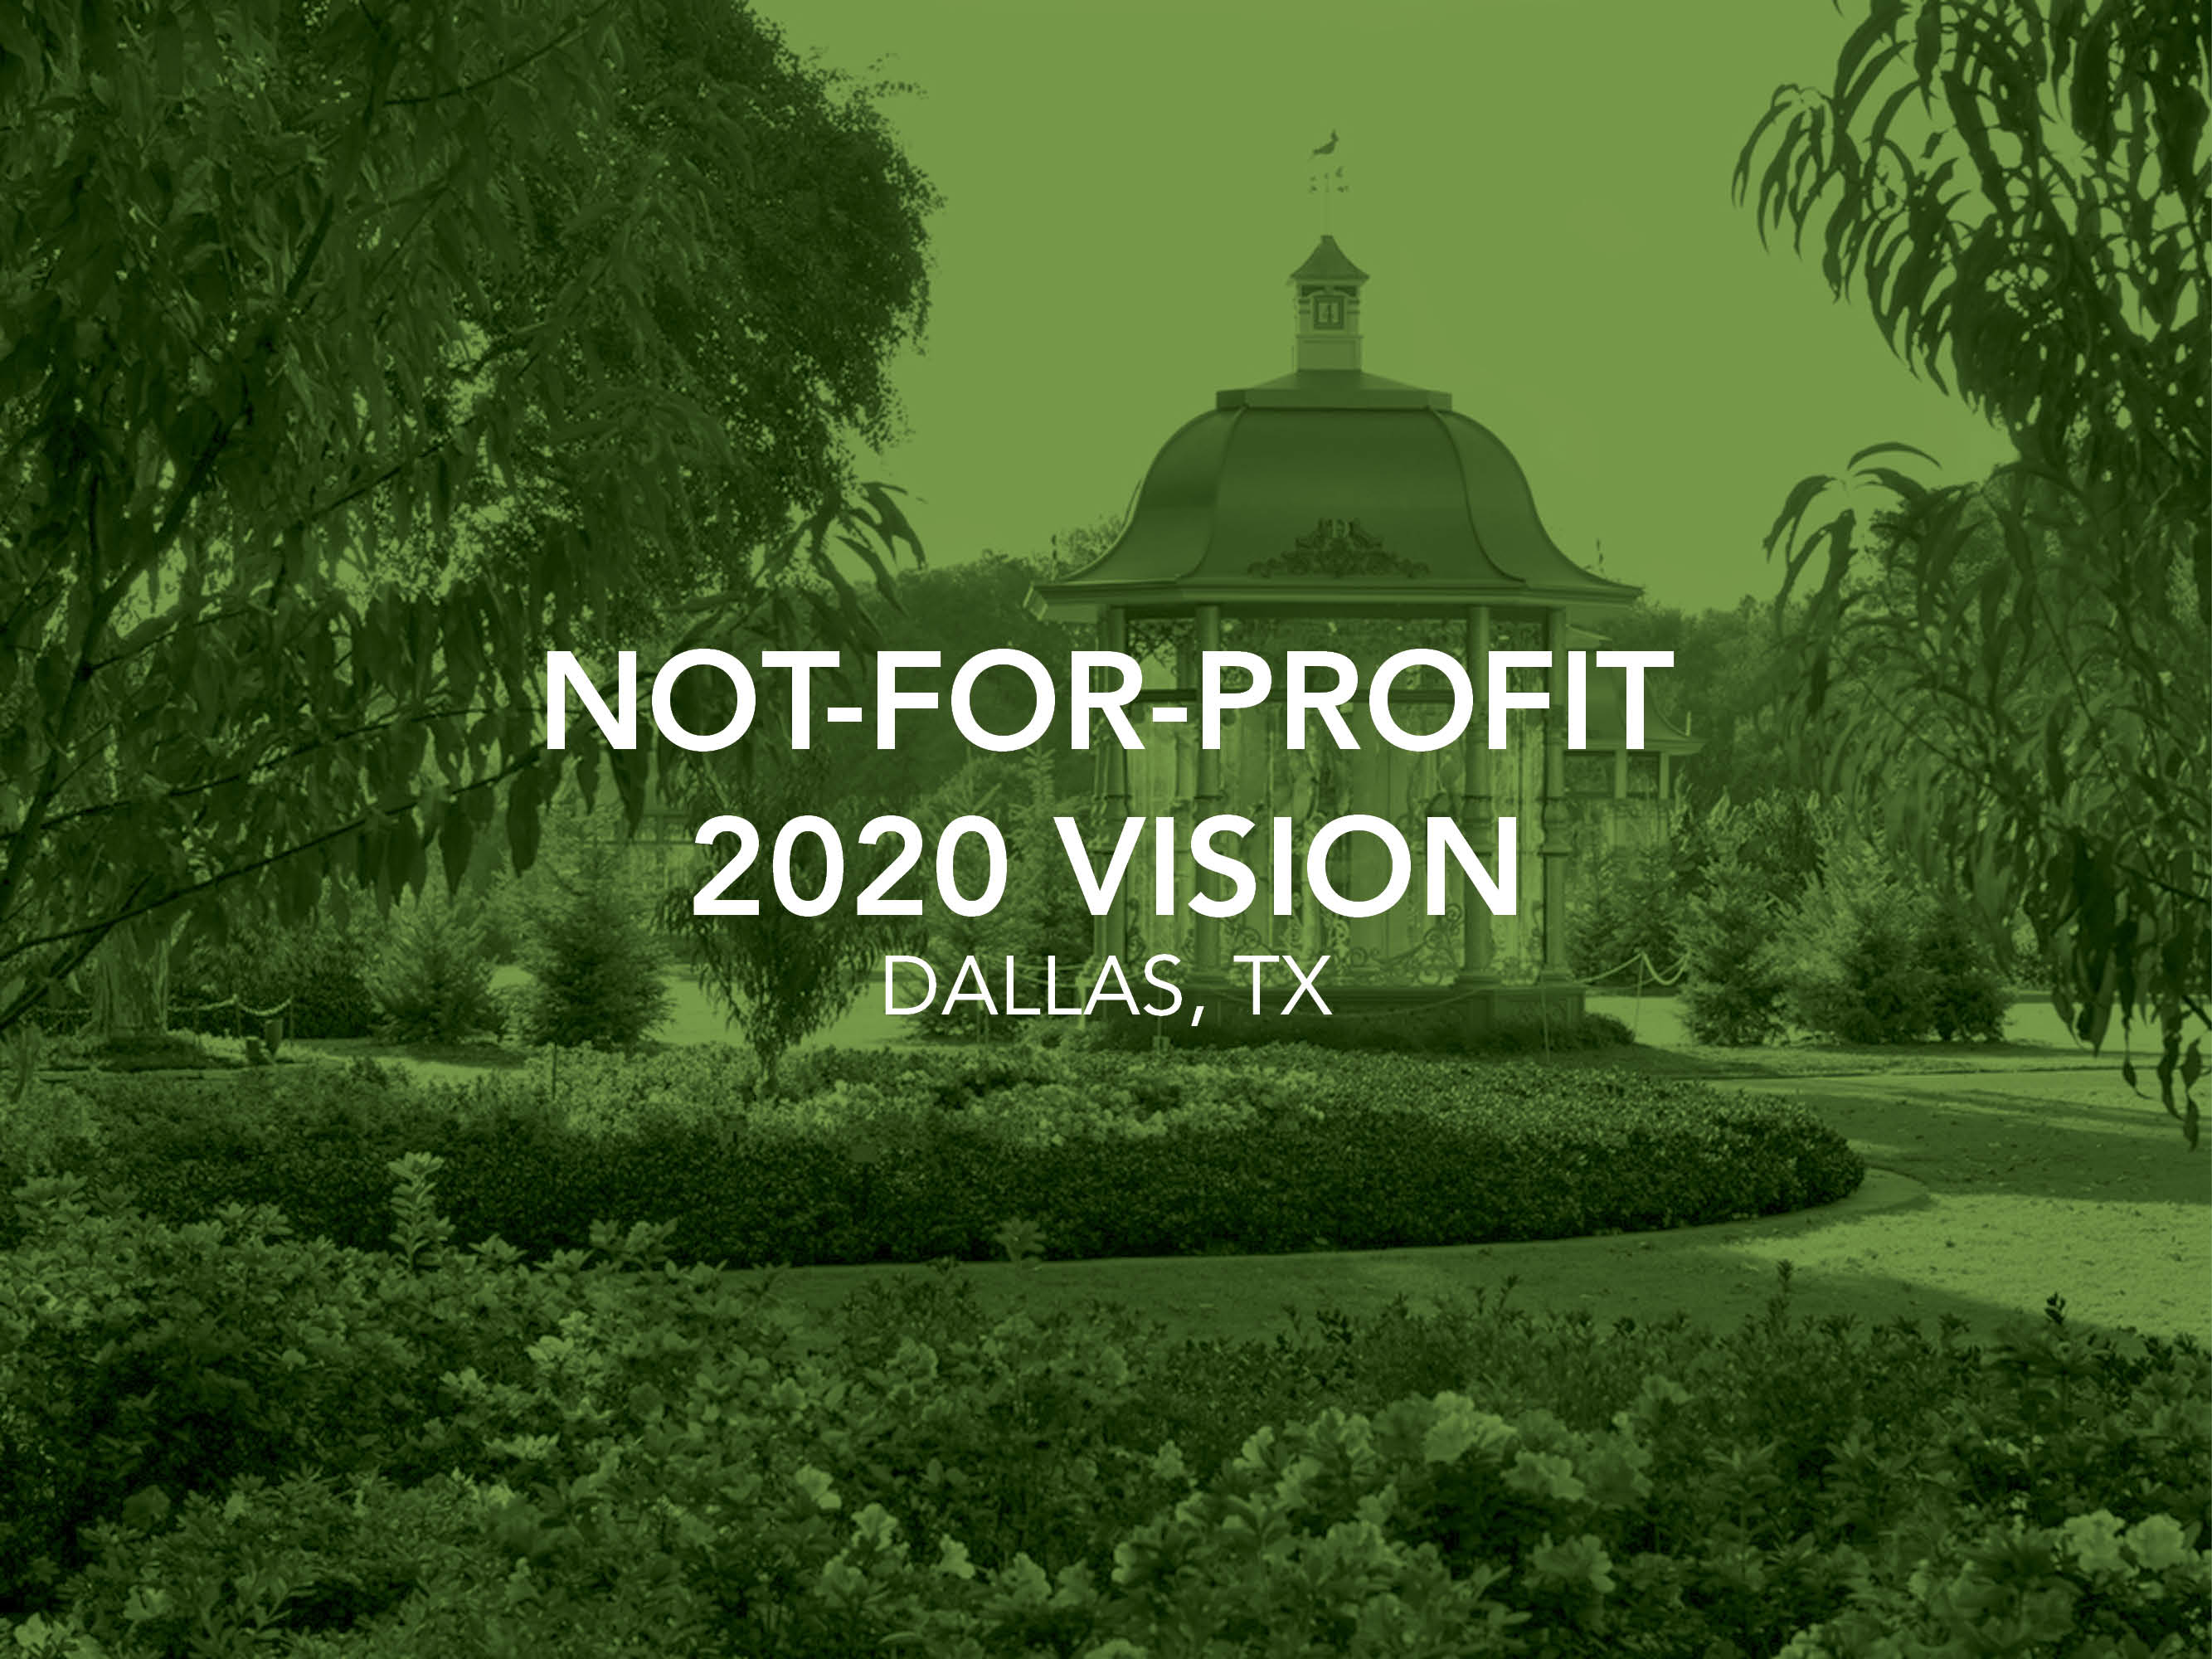 Not-for-Profit 2020 Vision: Planning for Prosperity